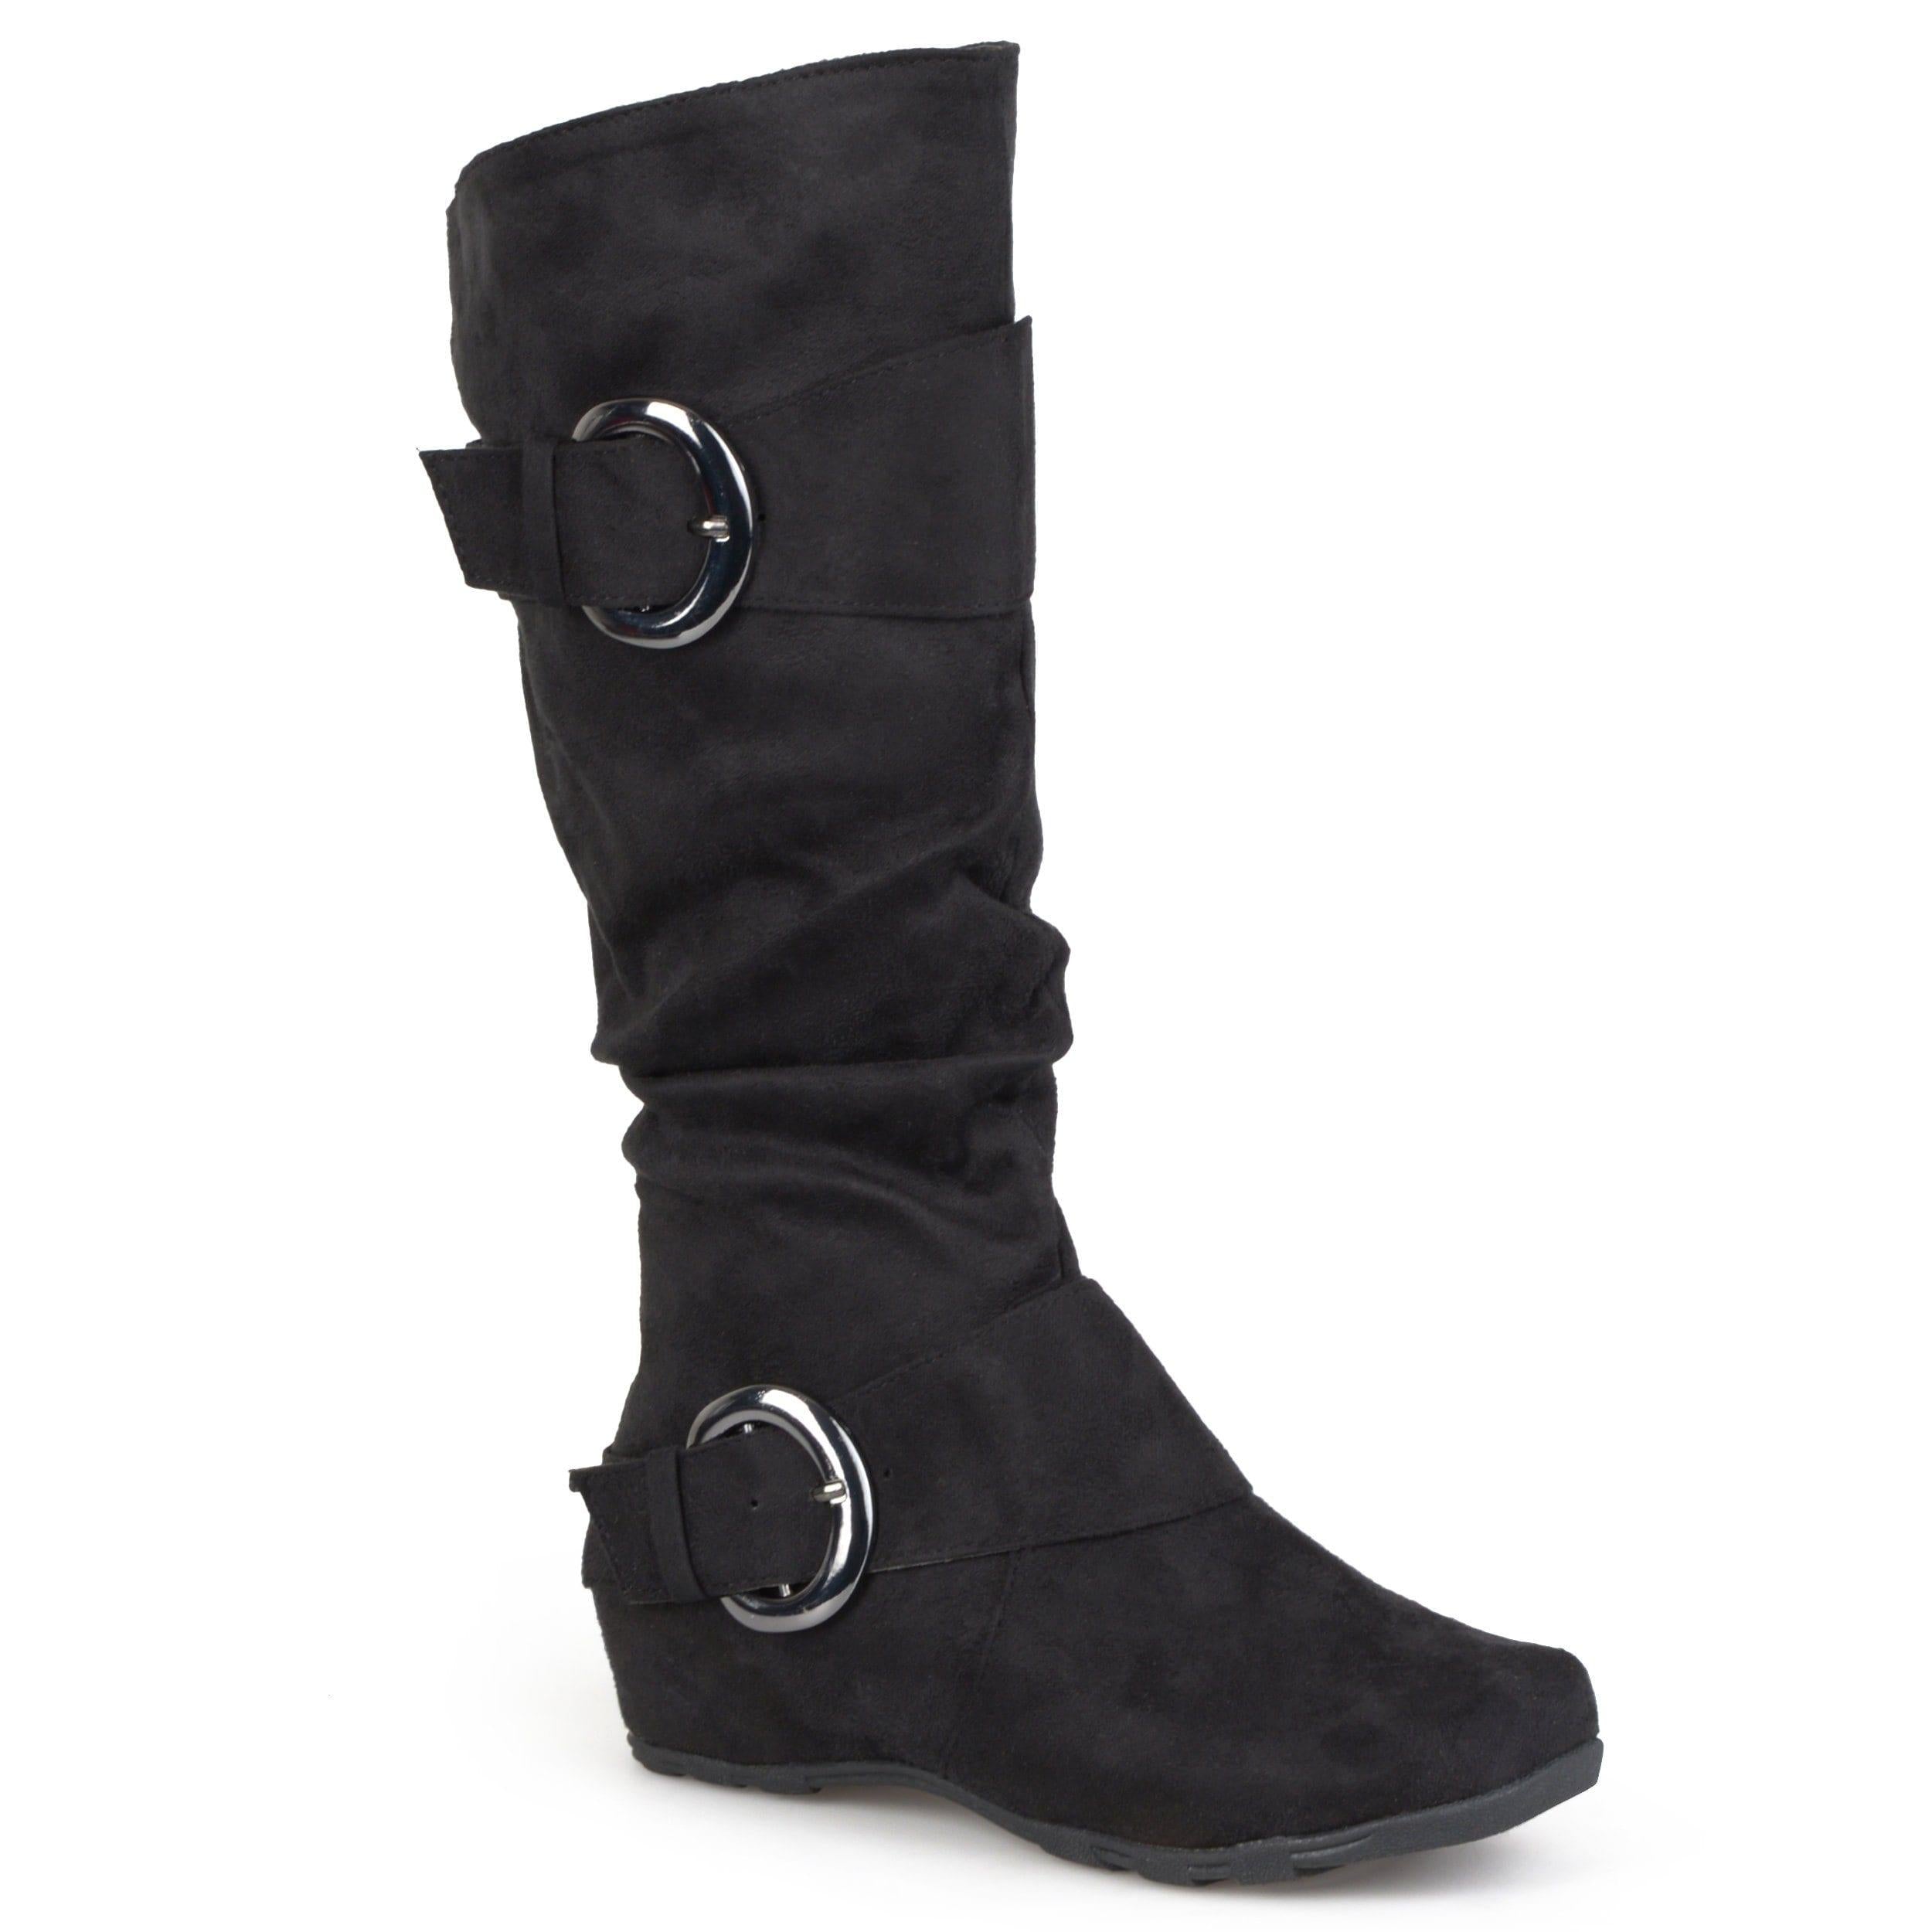 Jester Boots, Women's Knee High Boots